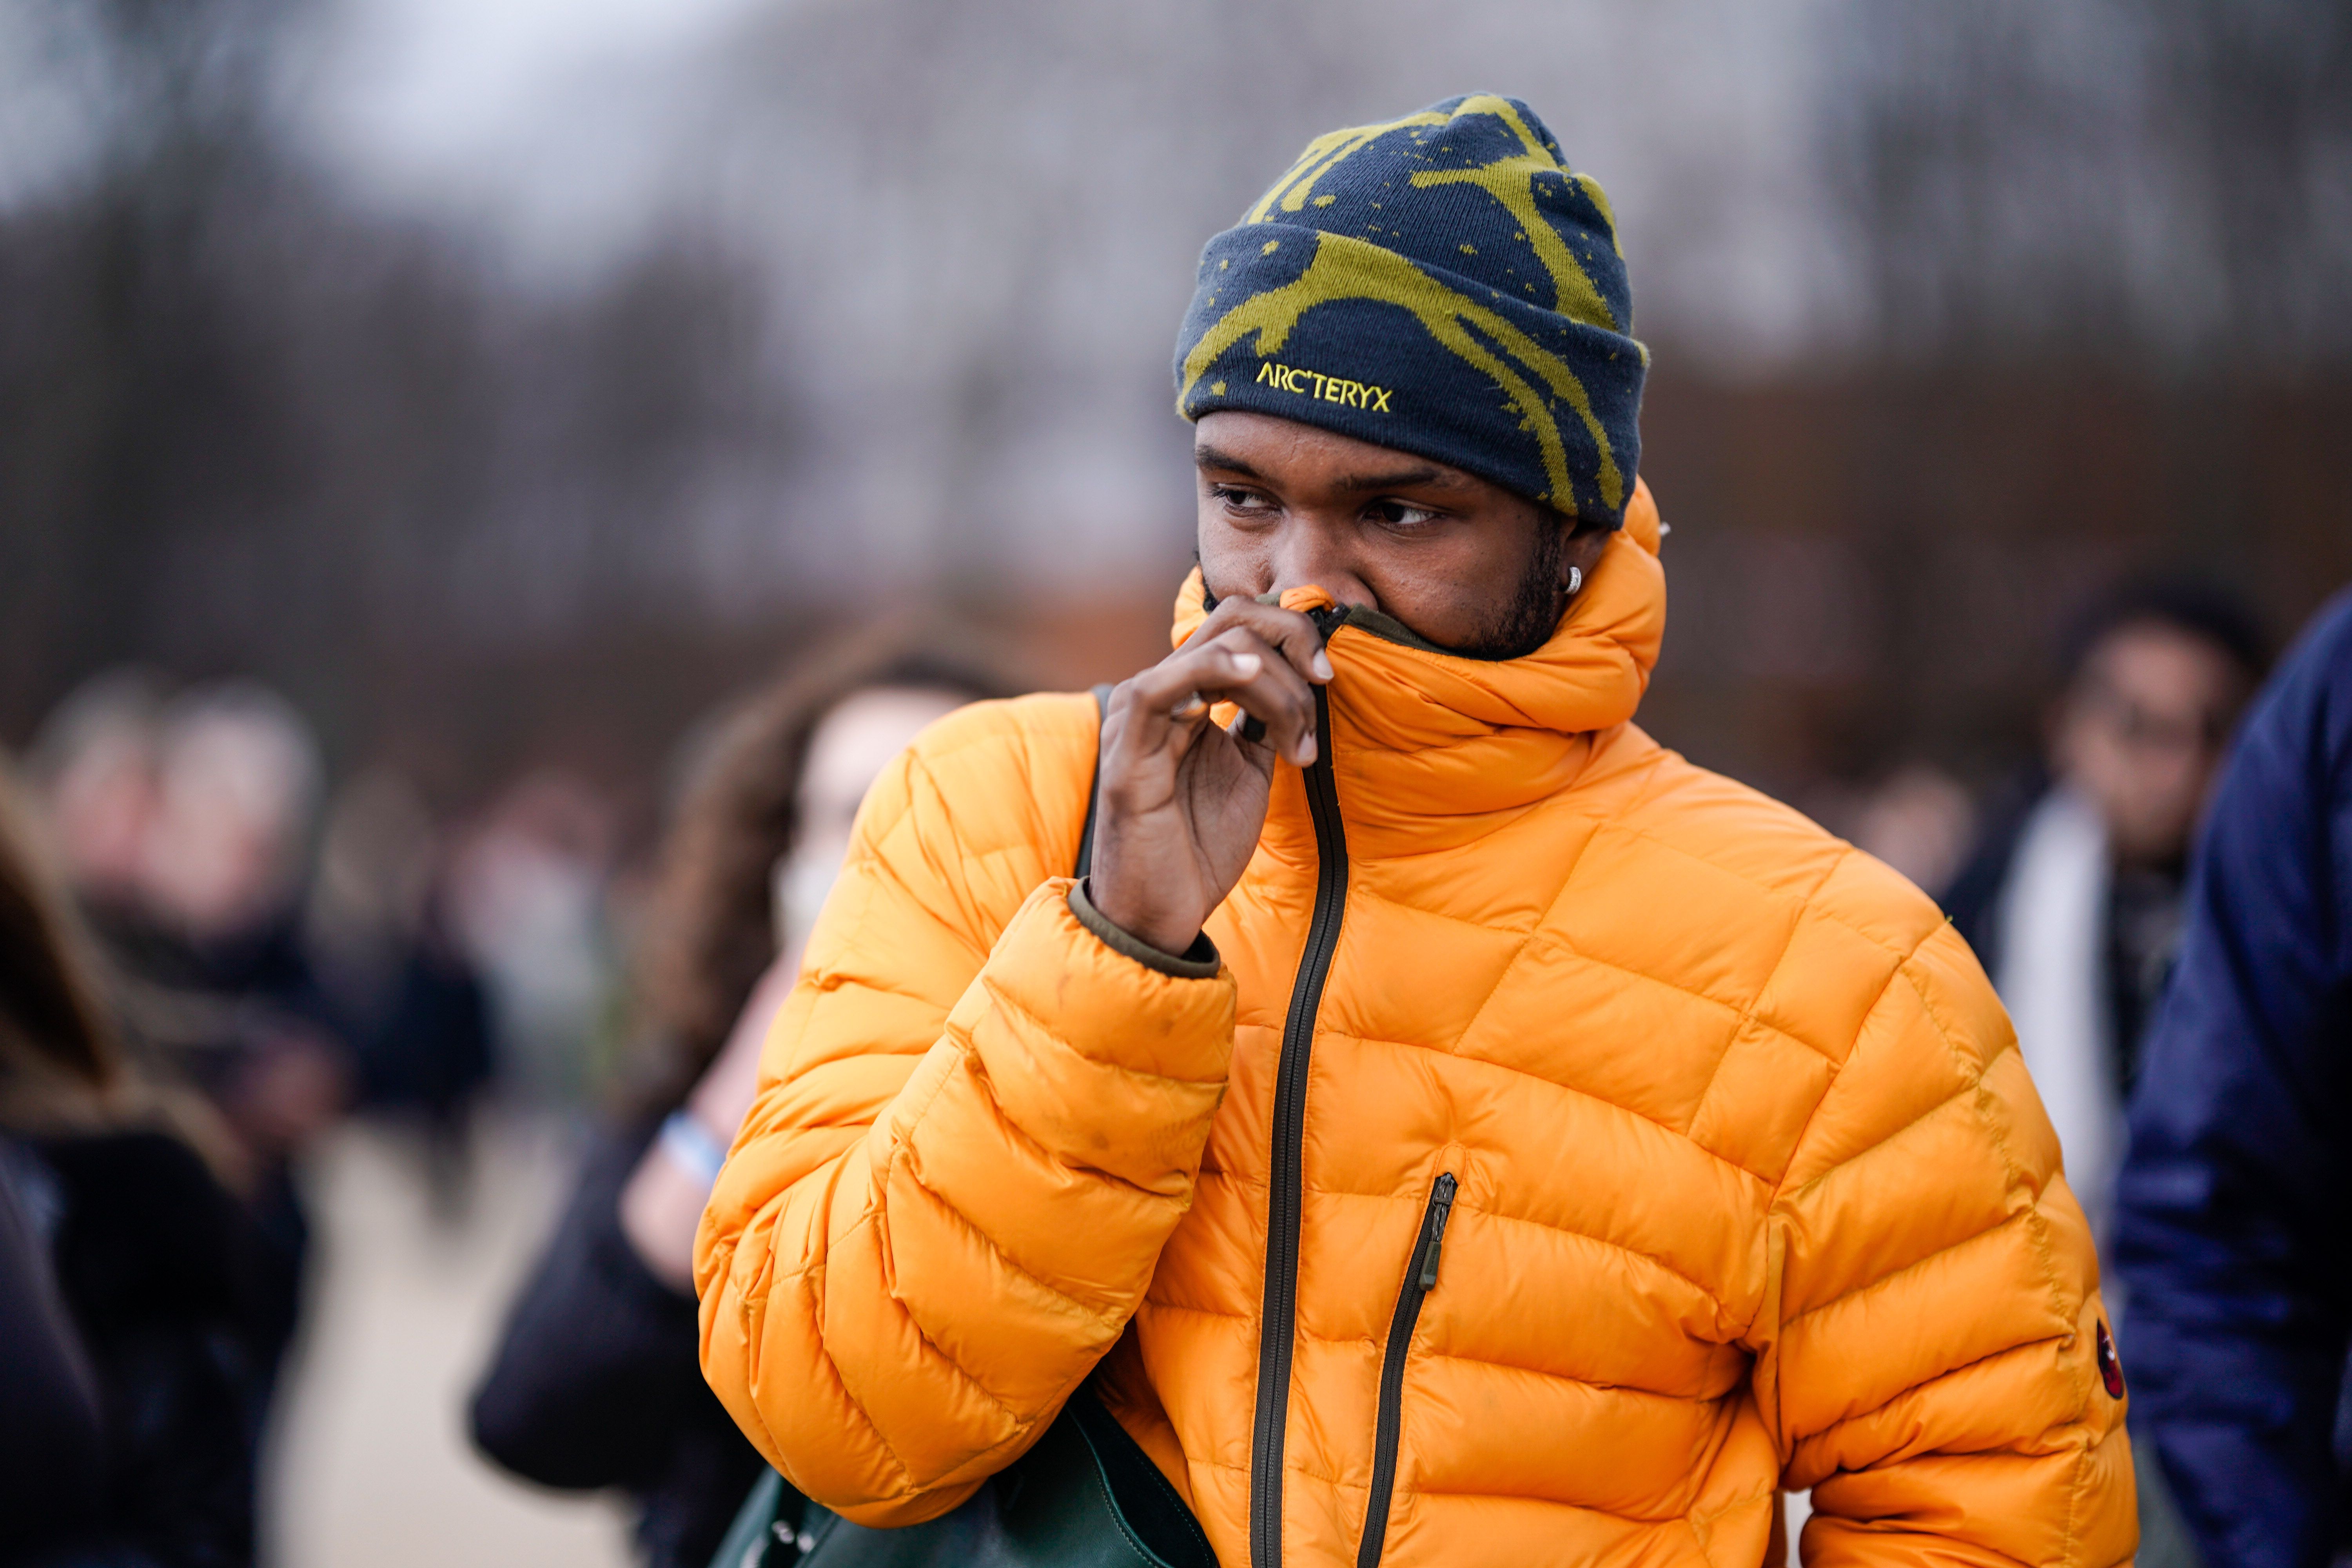 National census reel Medicinal Frank Ocean Is The Face Of 2019's Biggest Trend: The High-End Euro Hiker